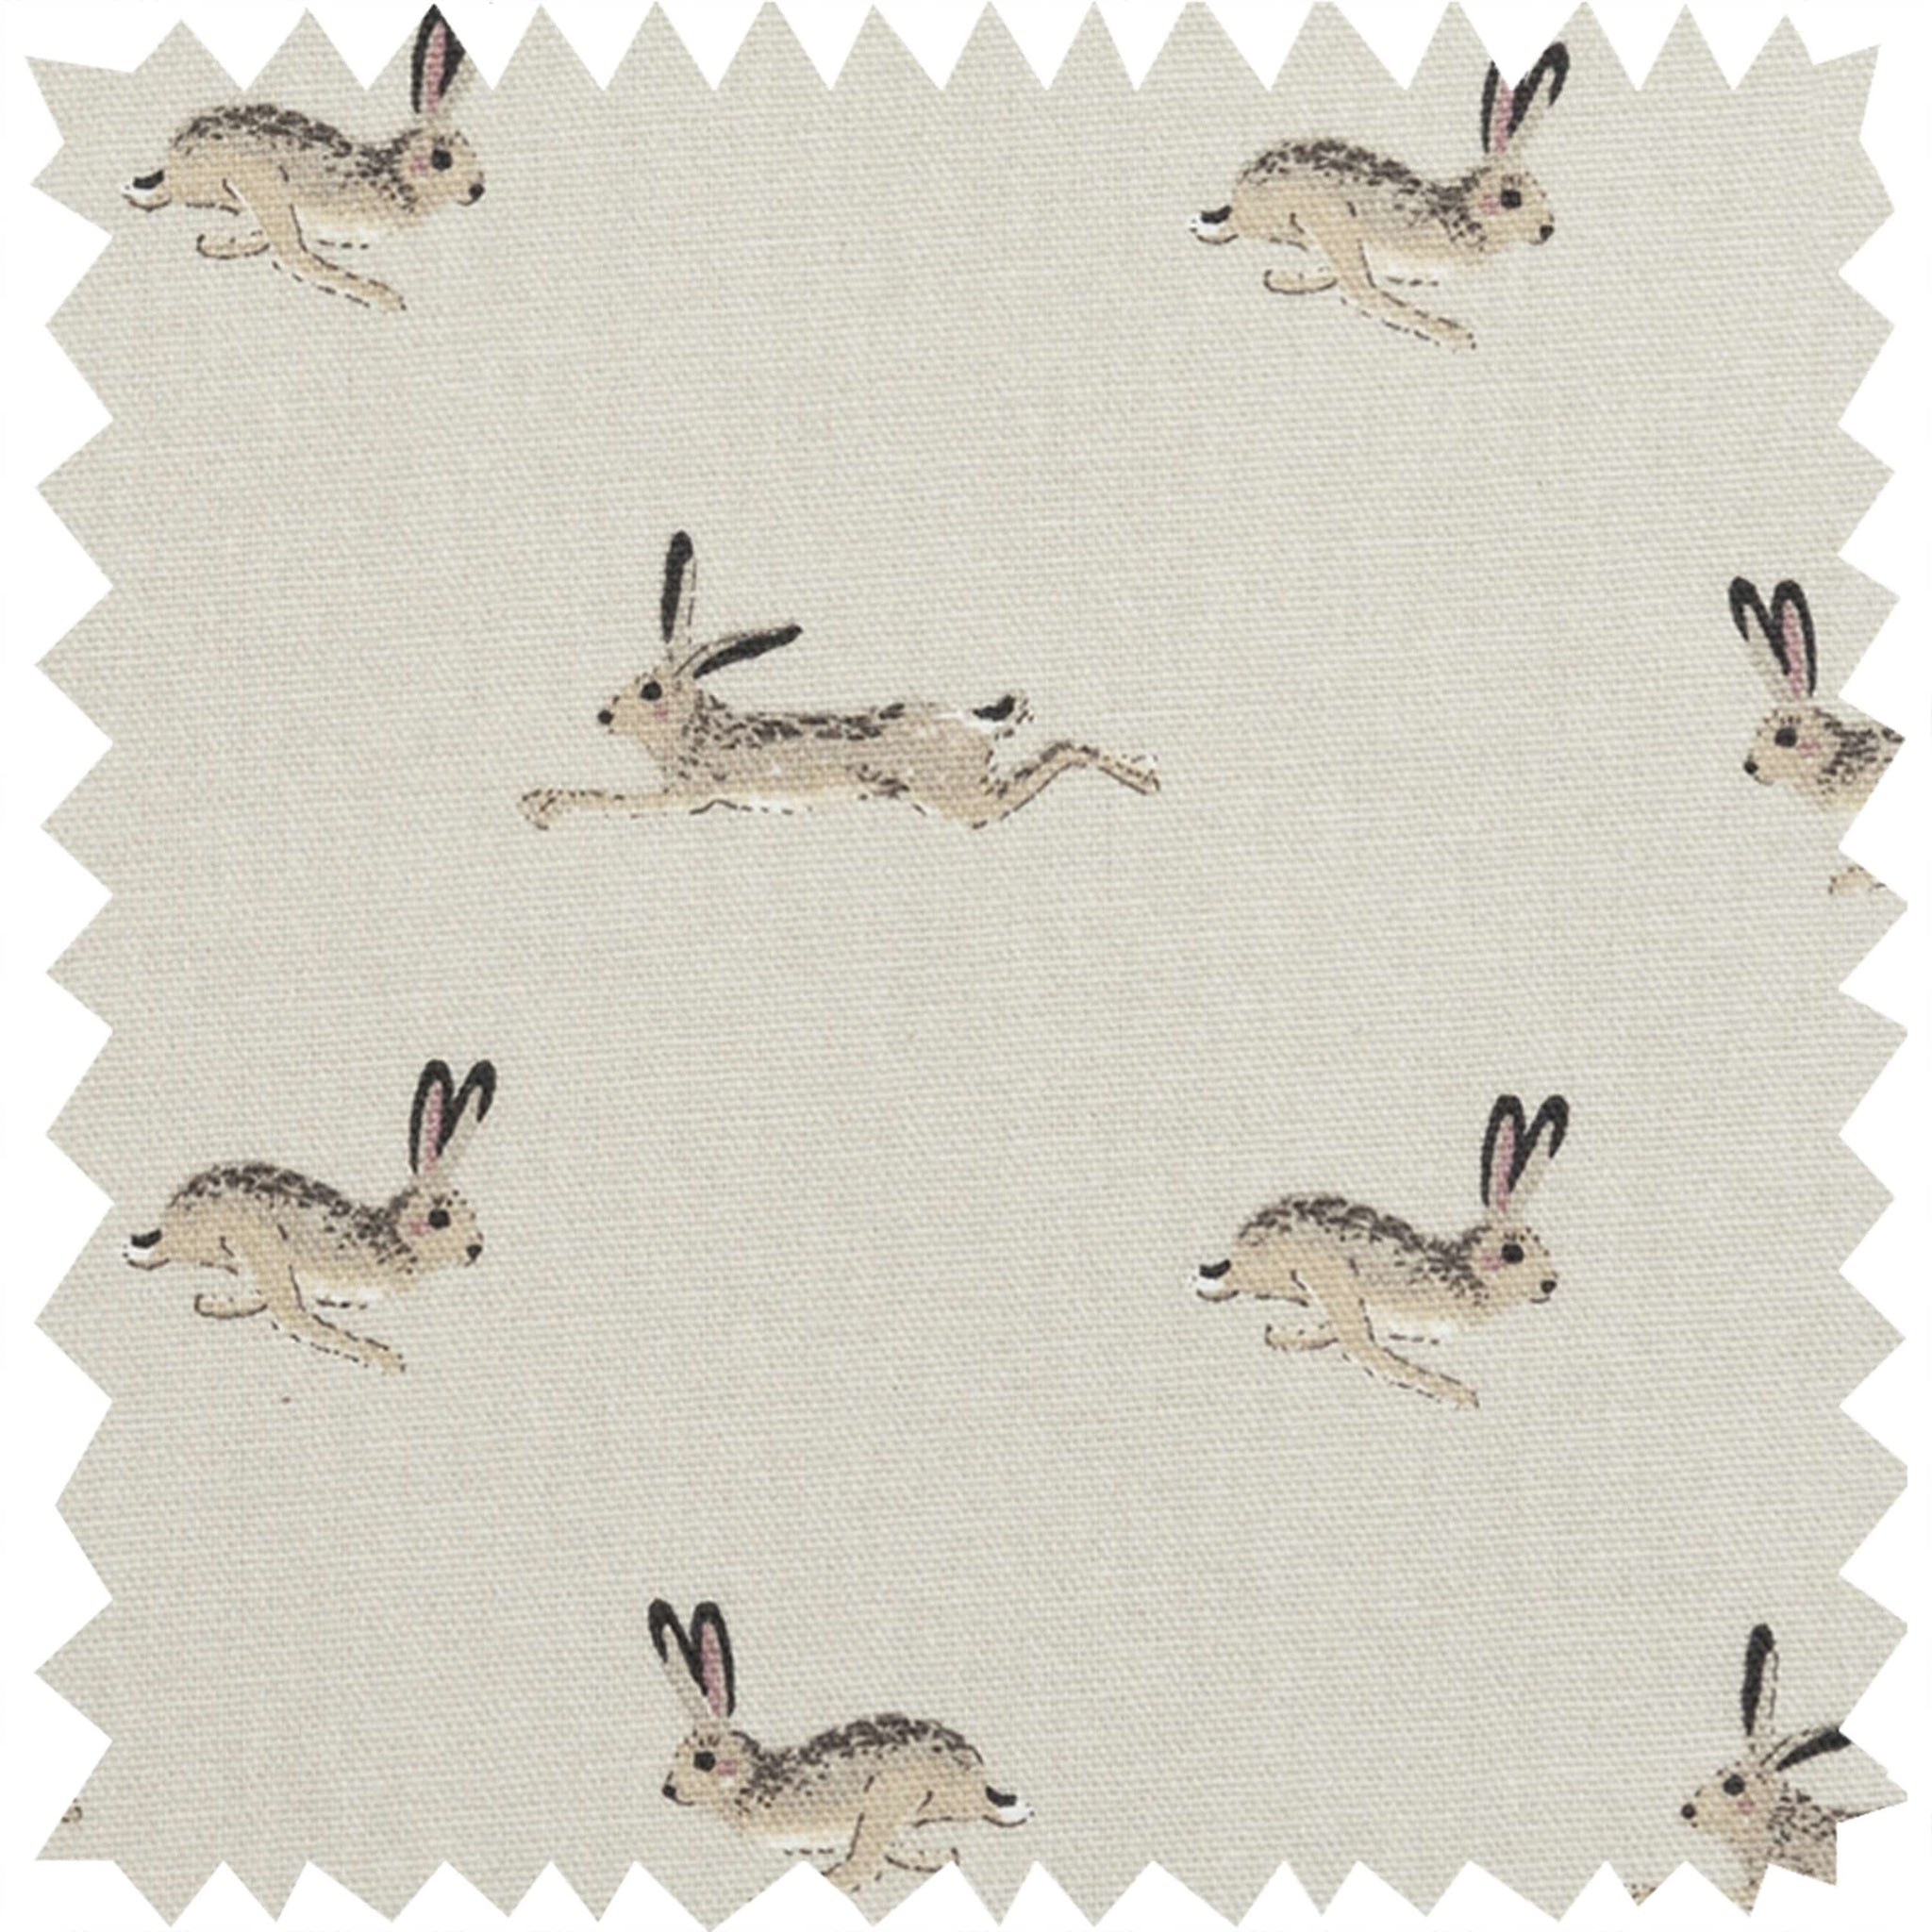 Hare Fabric Placemat